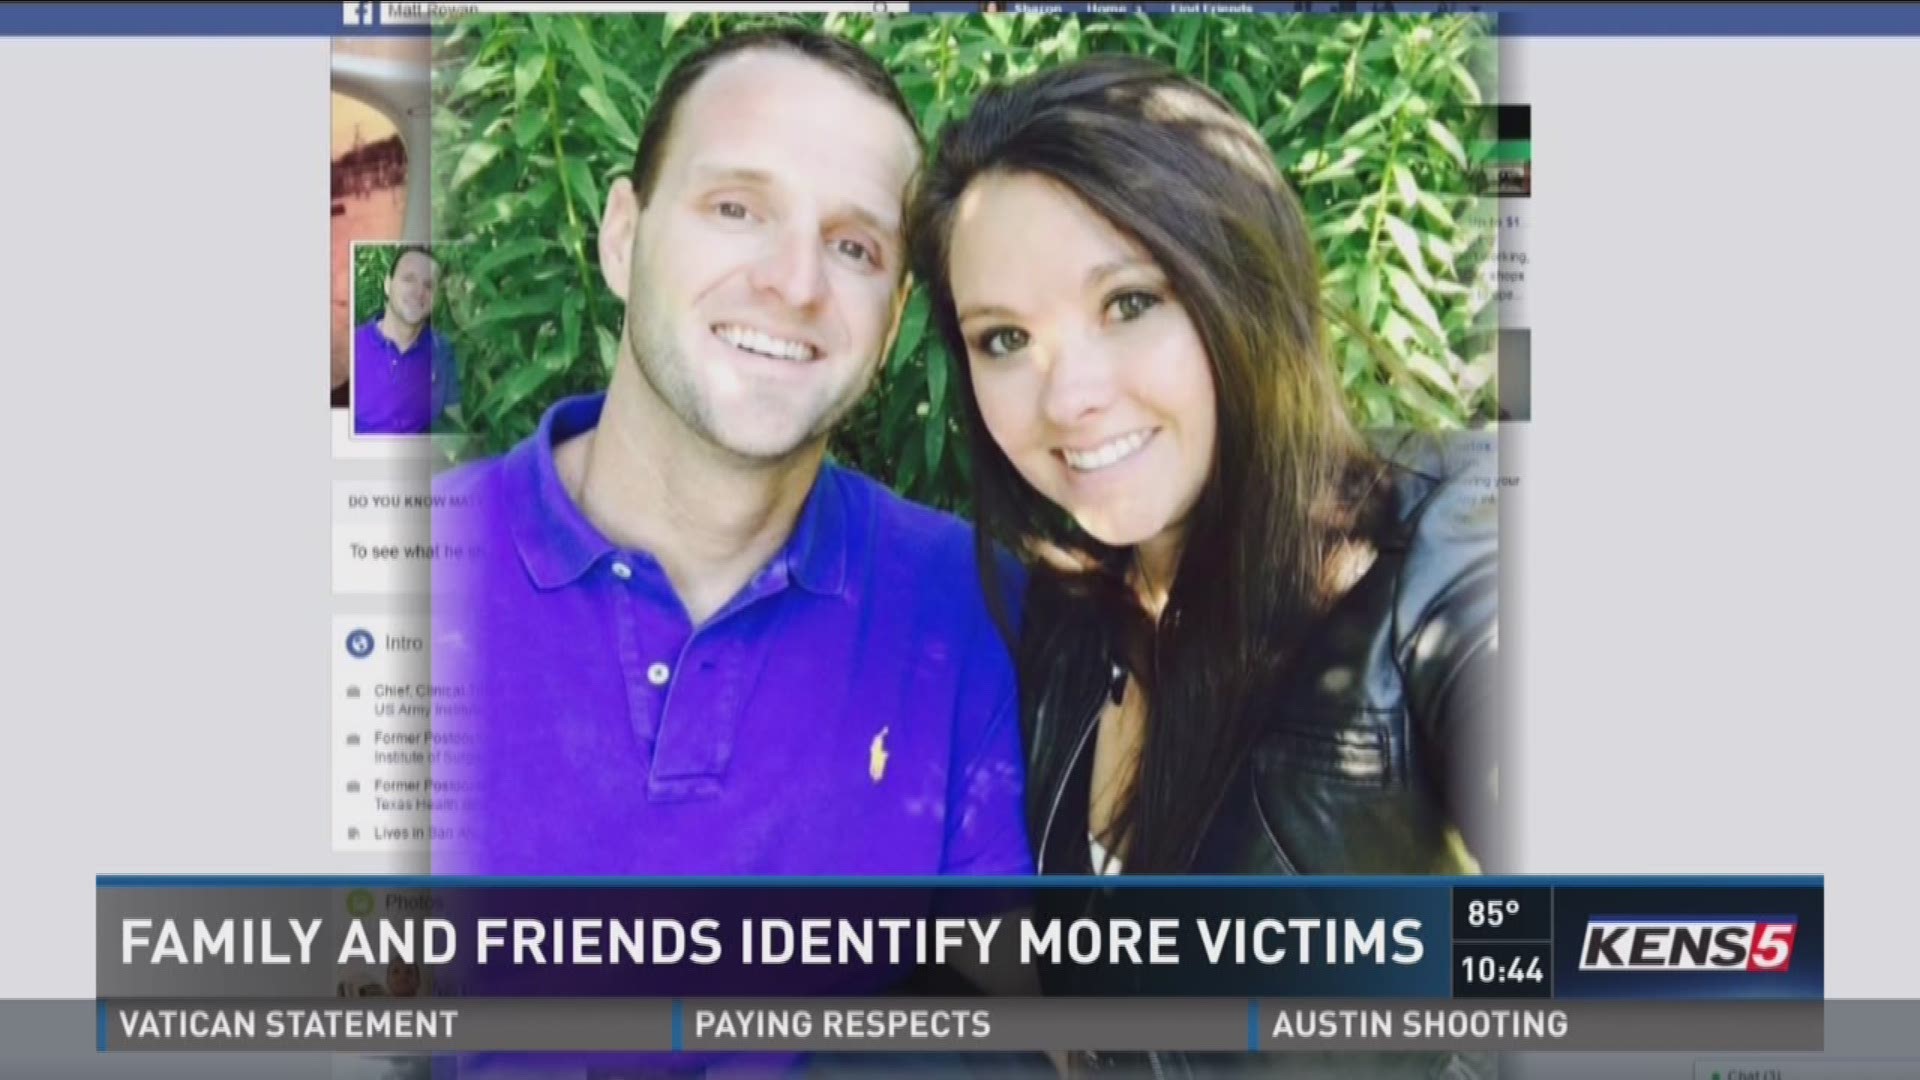 Family and friends identify more victims